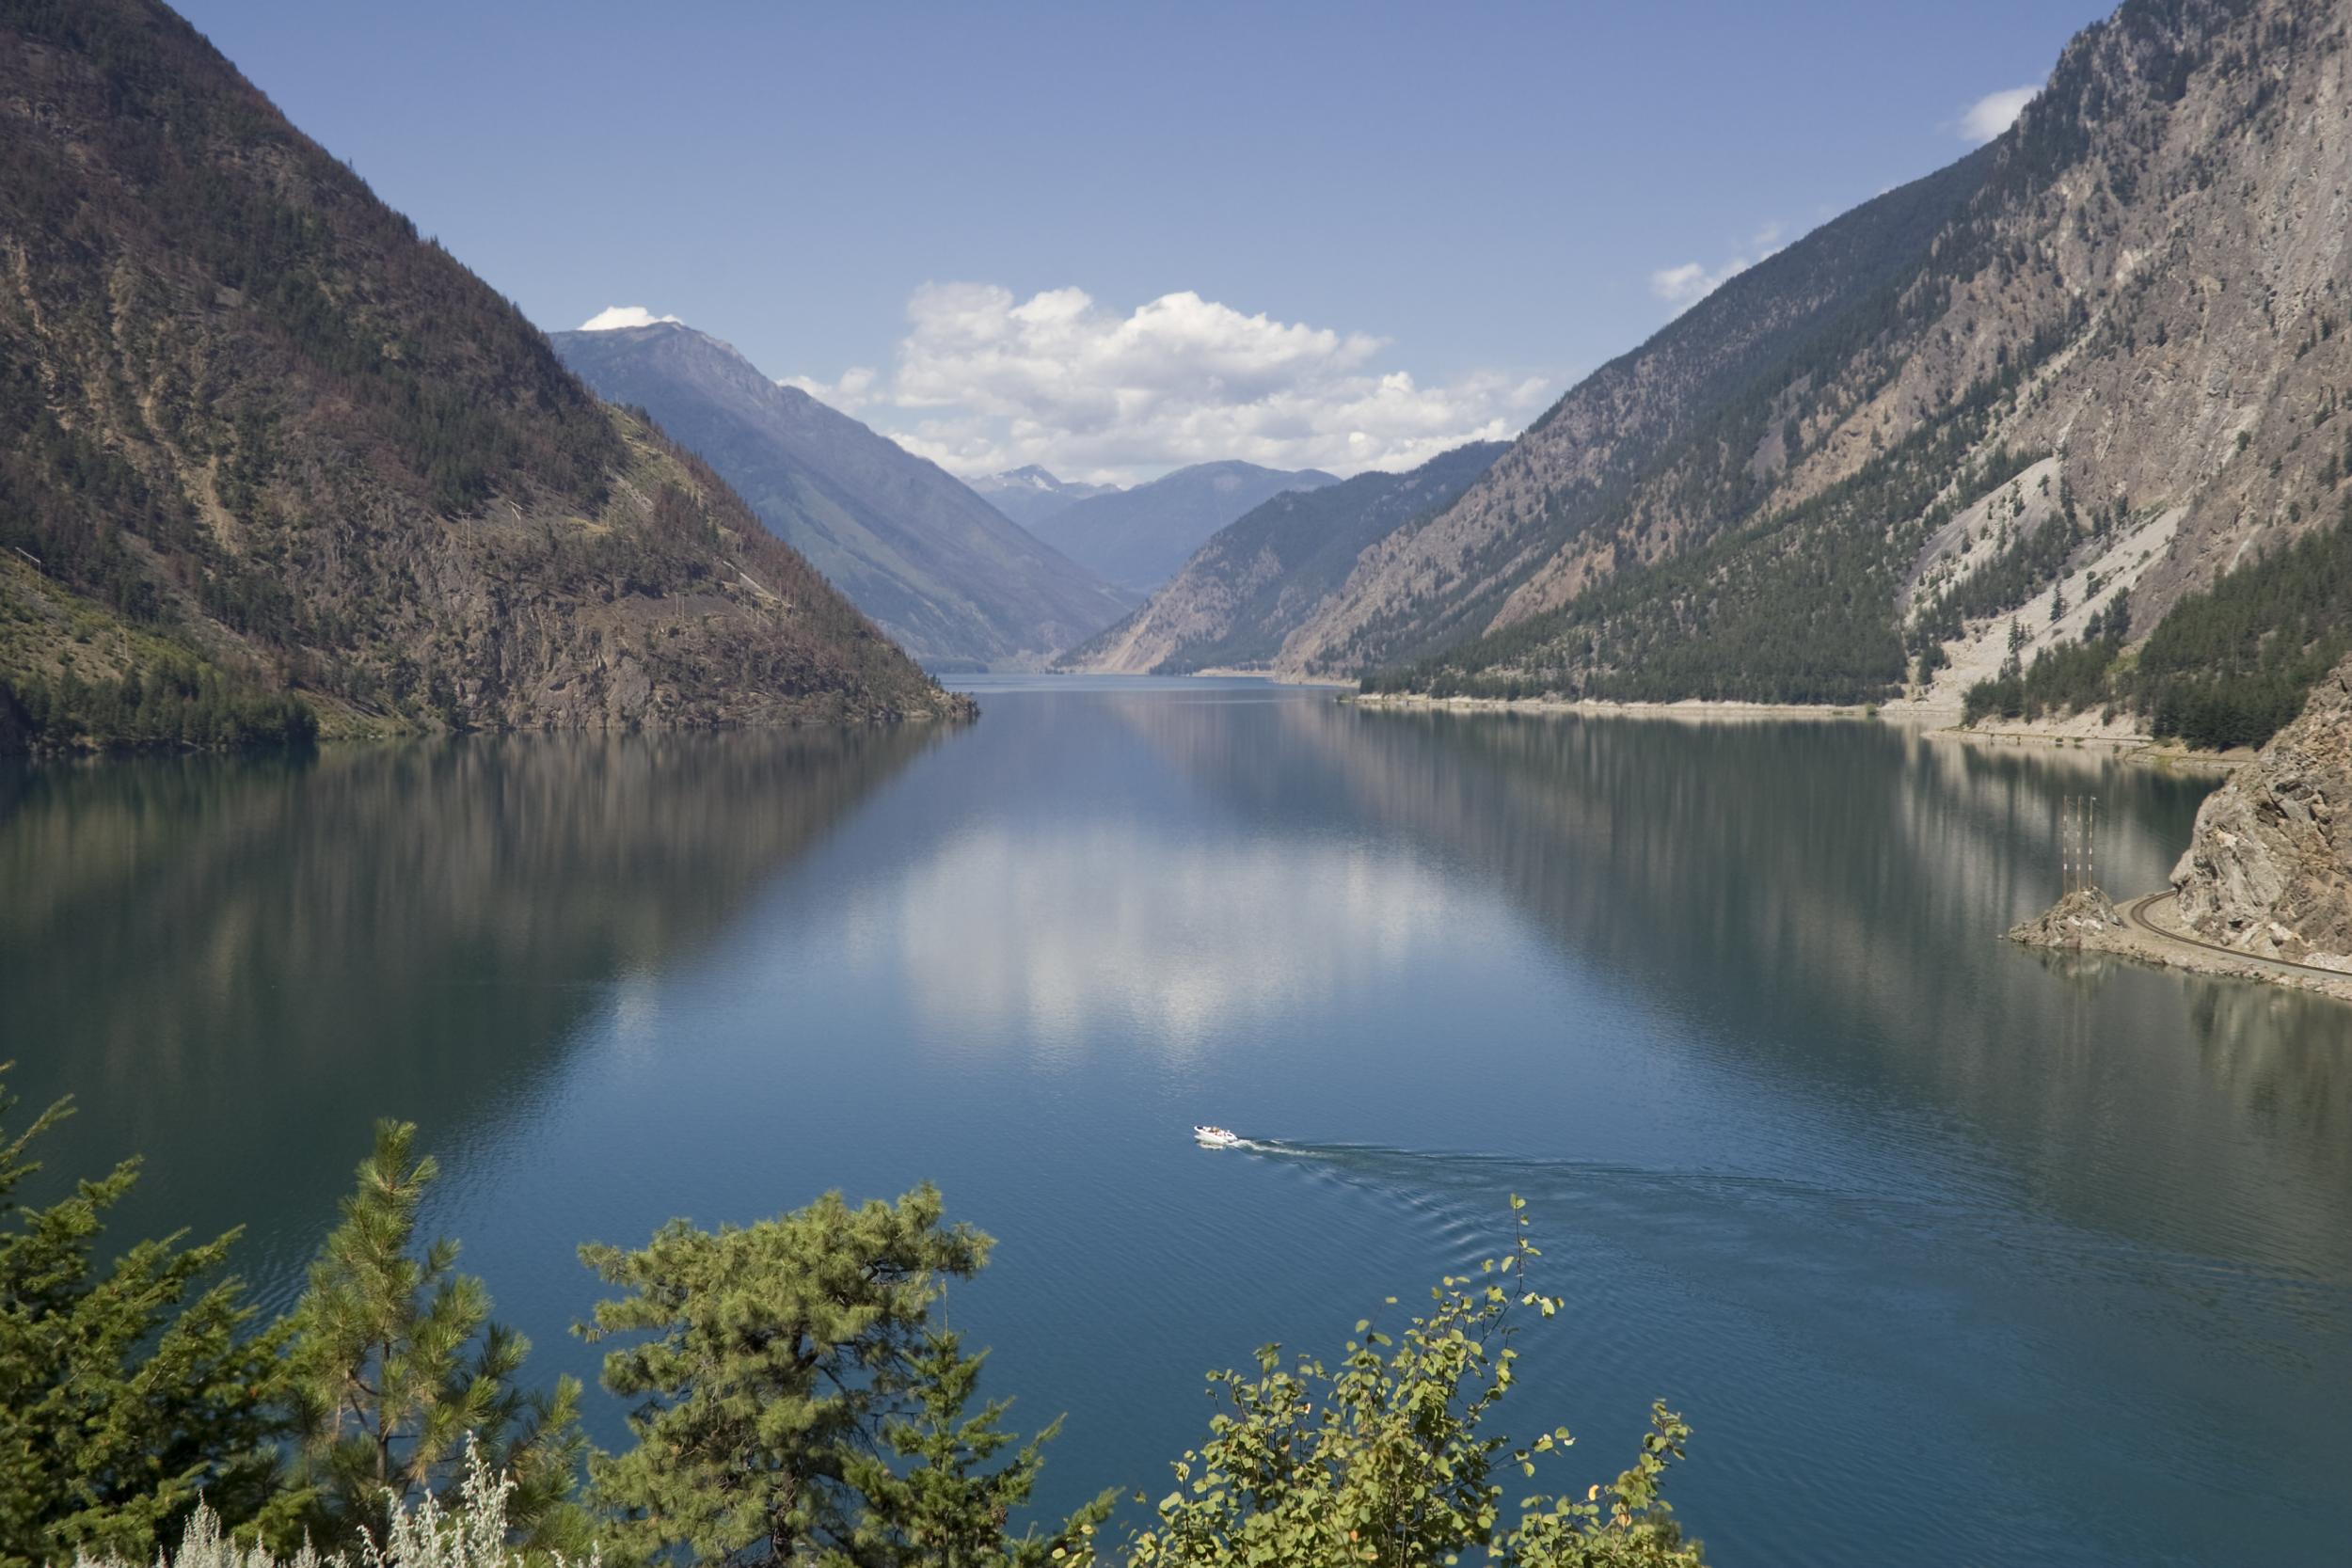 Seton Lake’s azure blue water is perfect spot to do some serious swimming – and it doesn’t get too busy